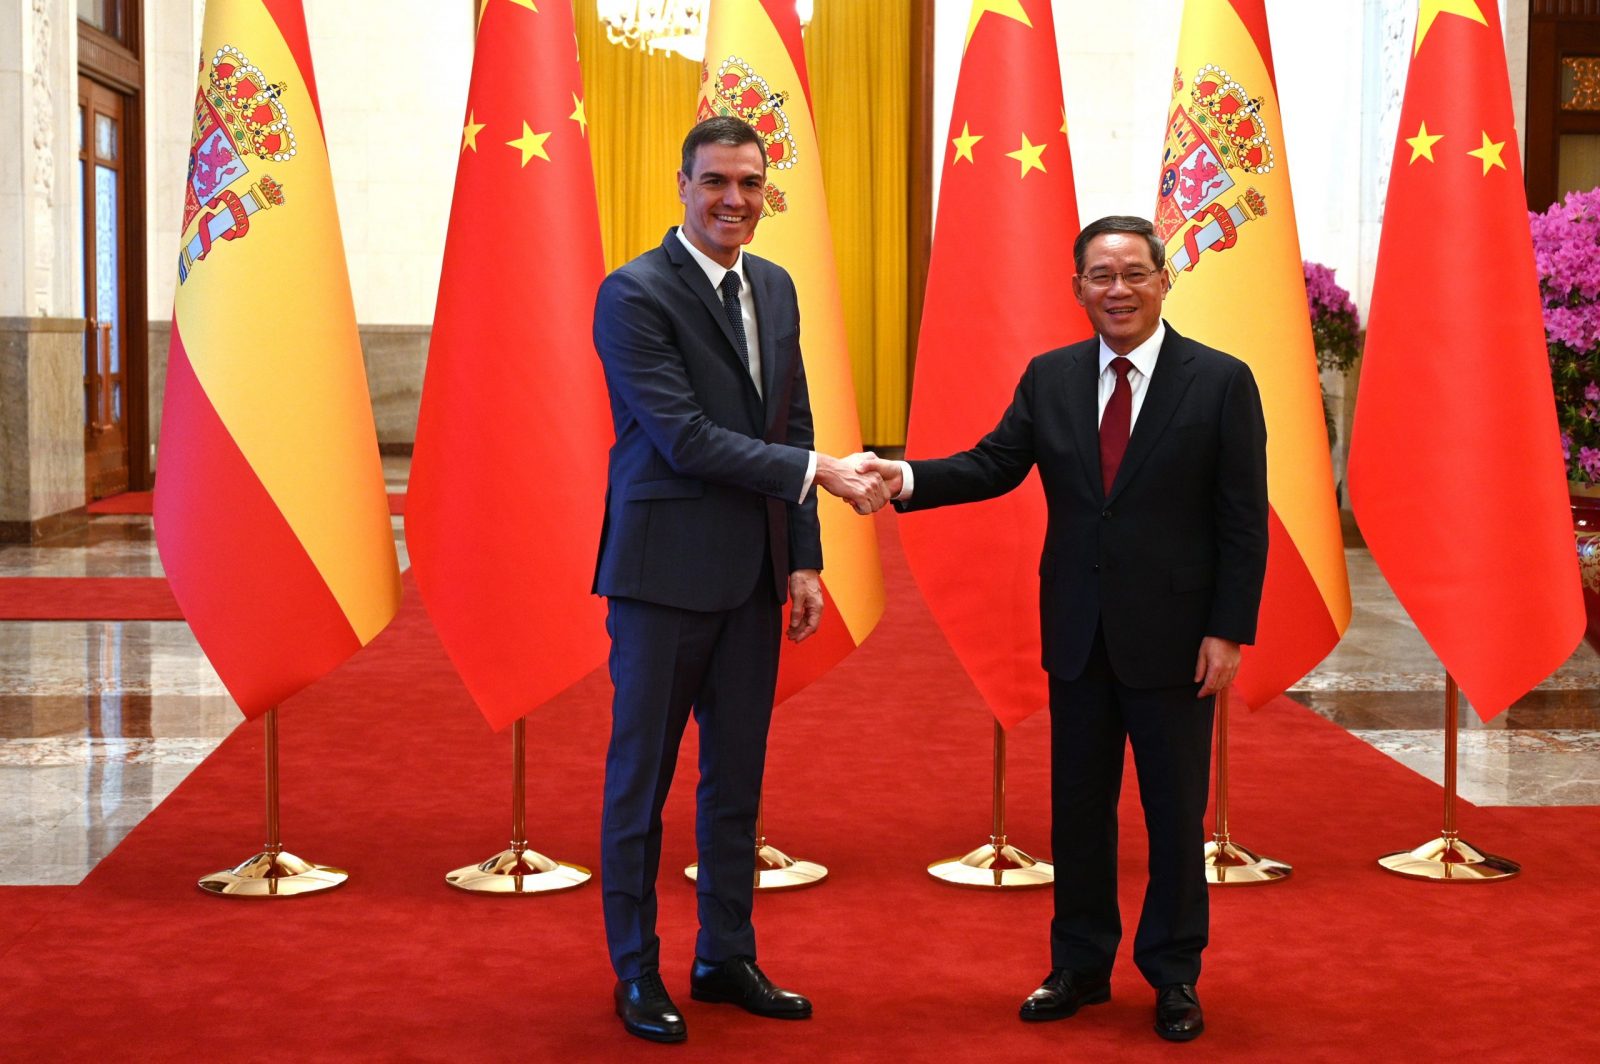 epa10551858 A handout photo made available by Spanish Prime Minister's Office shows Spanish Prime Minister Pedro Sanchez (L) meeting with the Chinese Prime Minister Li Qiang, in Beijing, China, 31 March 2023. Sanchez will be the first European leader to meet with Chinese President Xi Jinping after the latter met in Moscow with Russian President Vladimir Putin and the presentation of the Chinese proposal to end the war in Ukraine.  EPA/BORJA PUIG DE LA BELLACASA HANDOUT  HANDOUT EDITORIAL USE ONLY/NO SALES